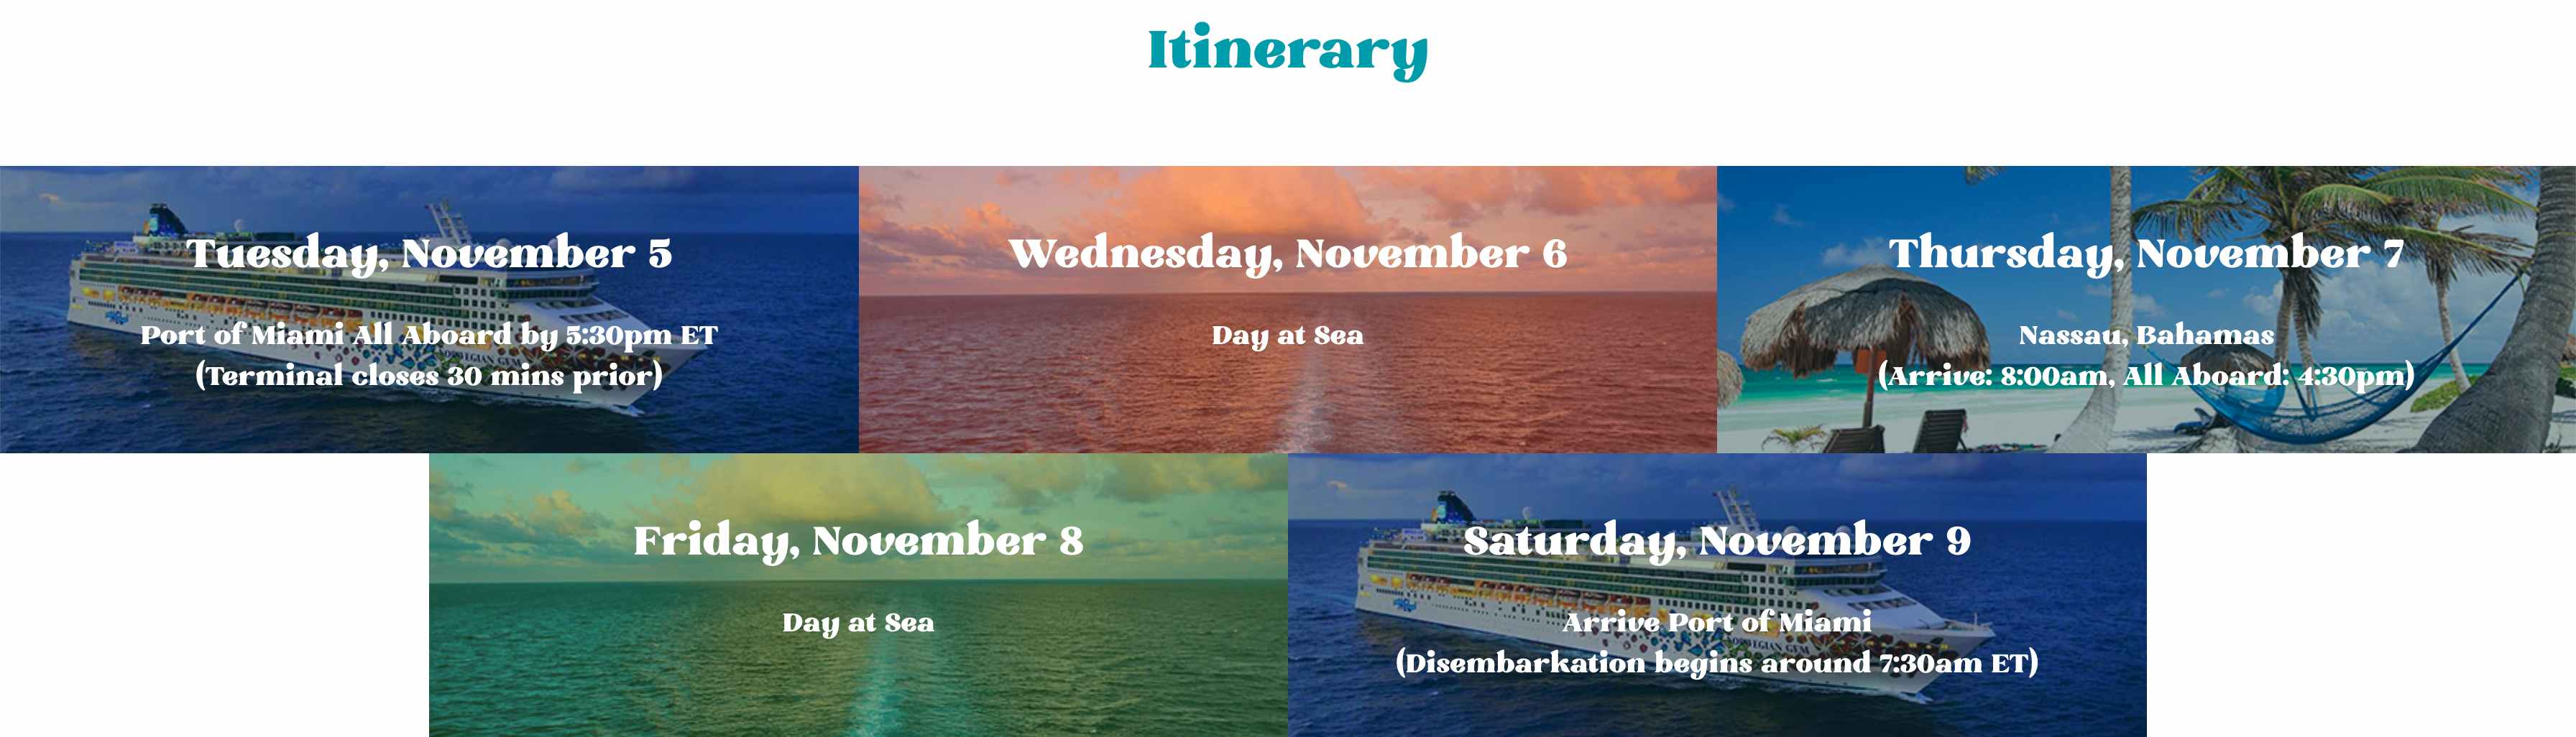 a screenshot of the hallmark channel christmas cruise itinerary 